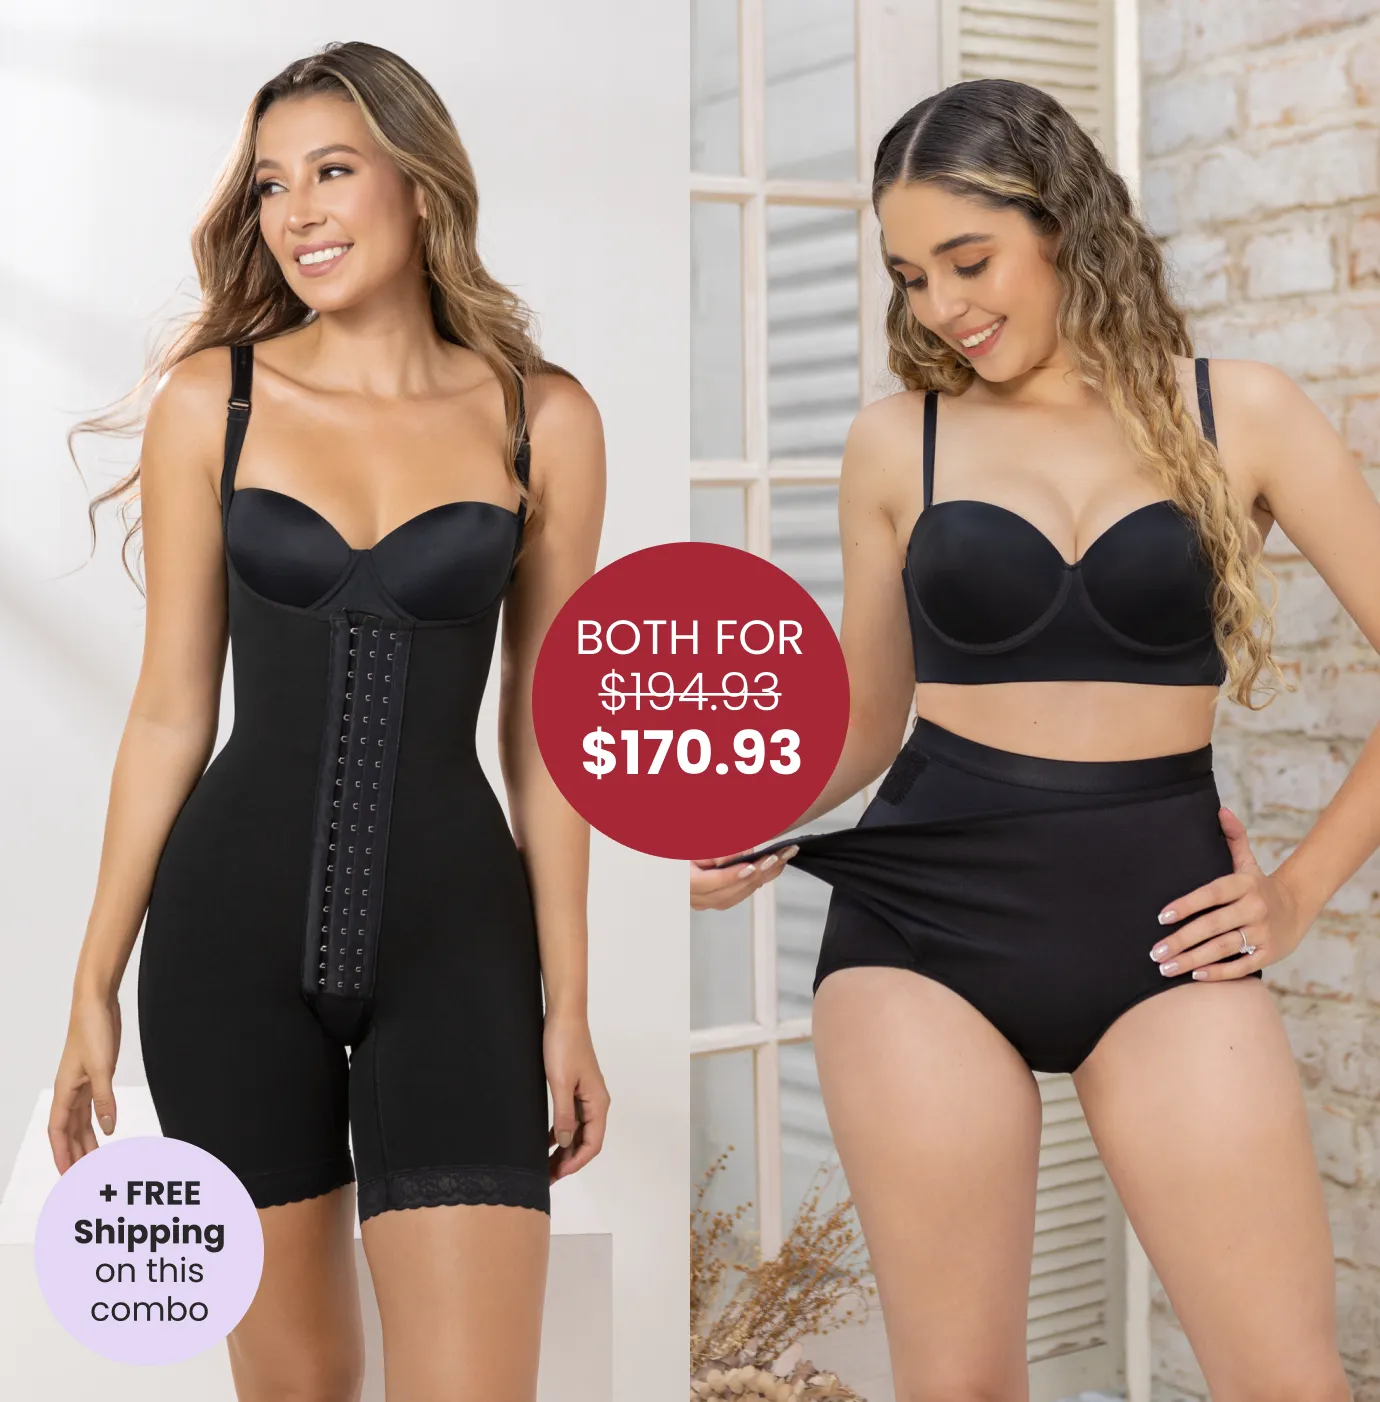 CYSM Full Body Shaper with Butt Lift for Sale in Los Angeles, CA - OfferUp